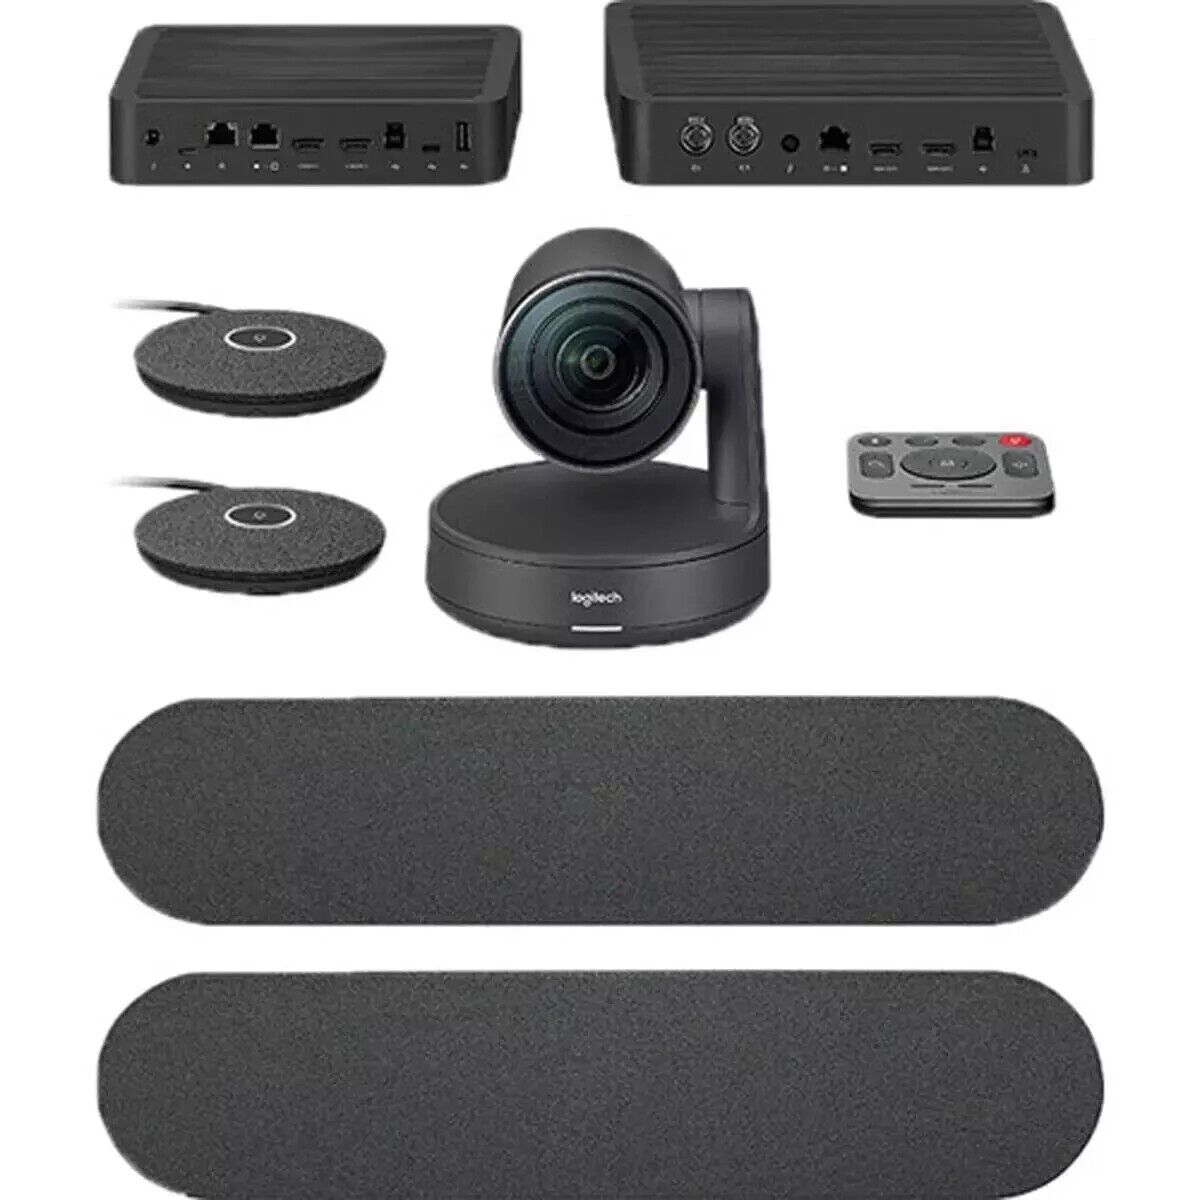 Logitech 960-001225 Rally Plus Ultra-HD Conferencing System - BRAND NEW